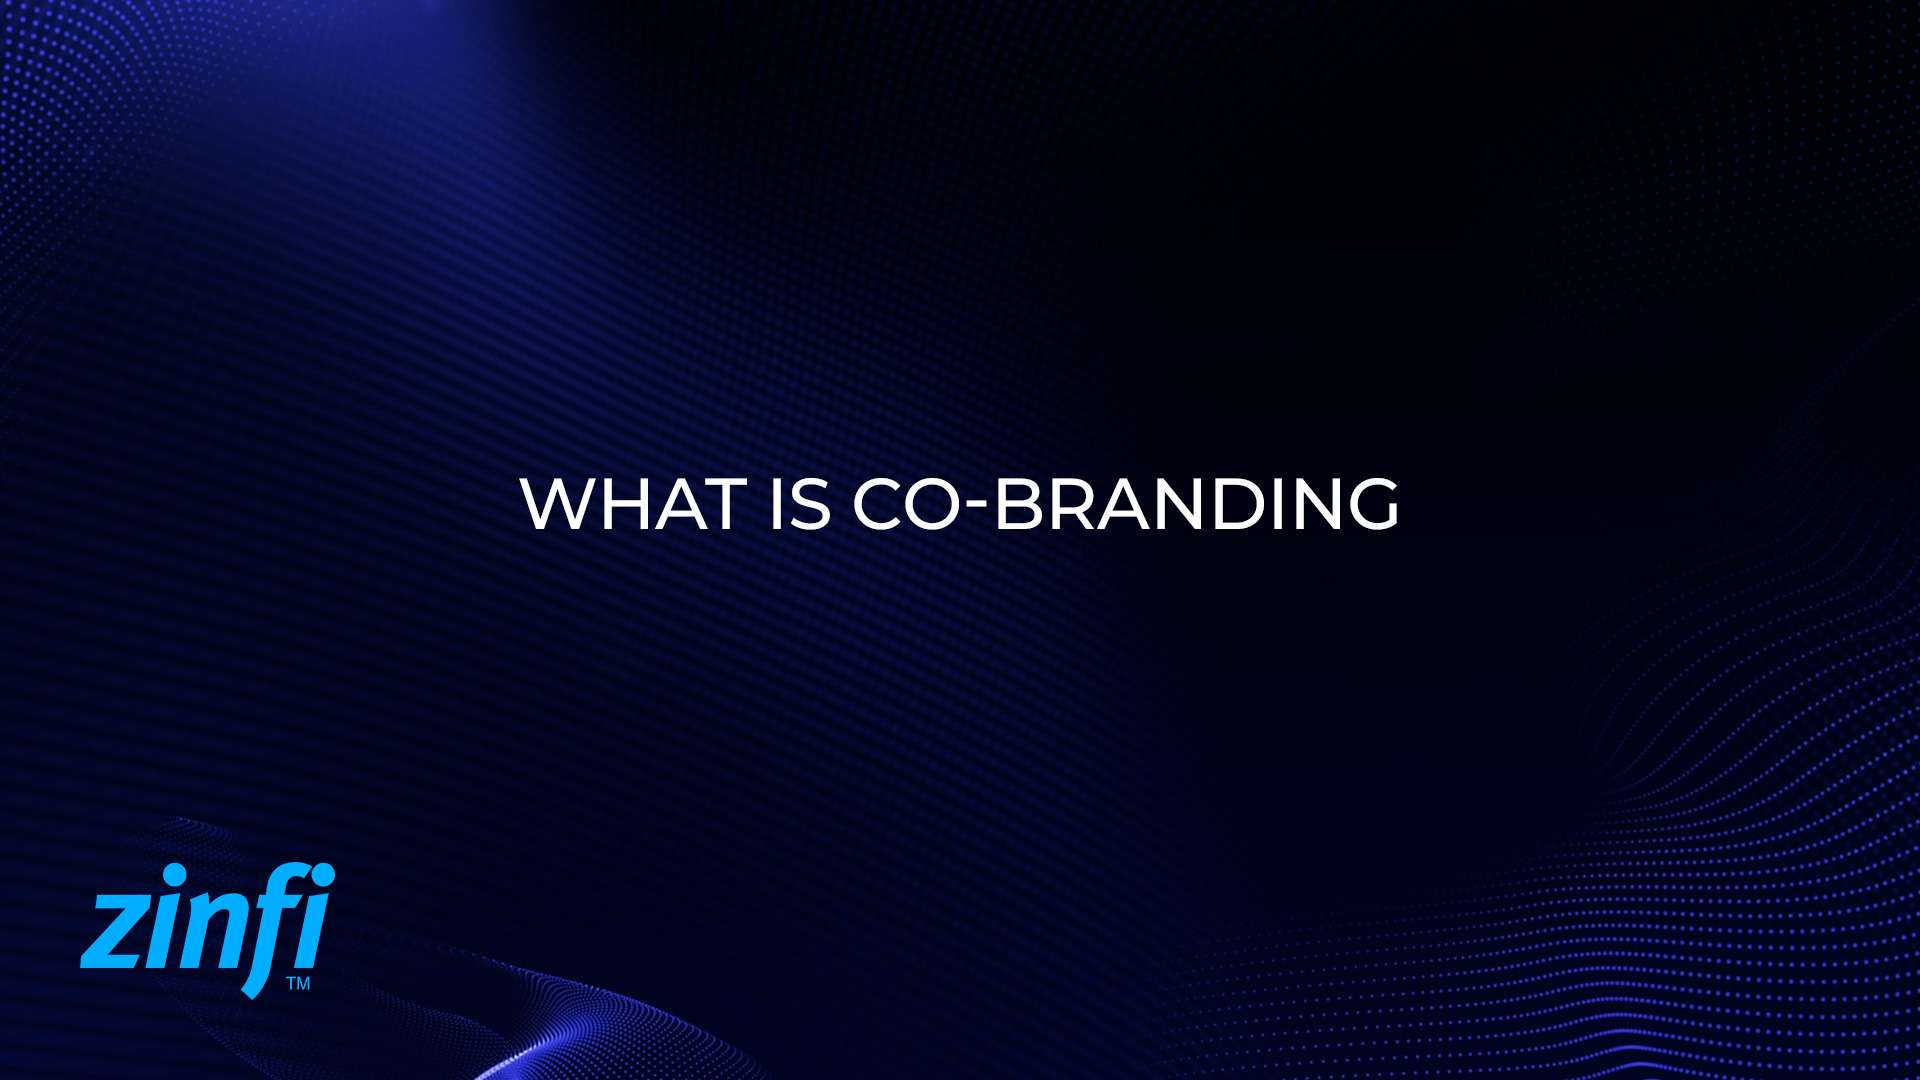 What is Co-branding?